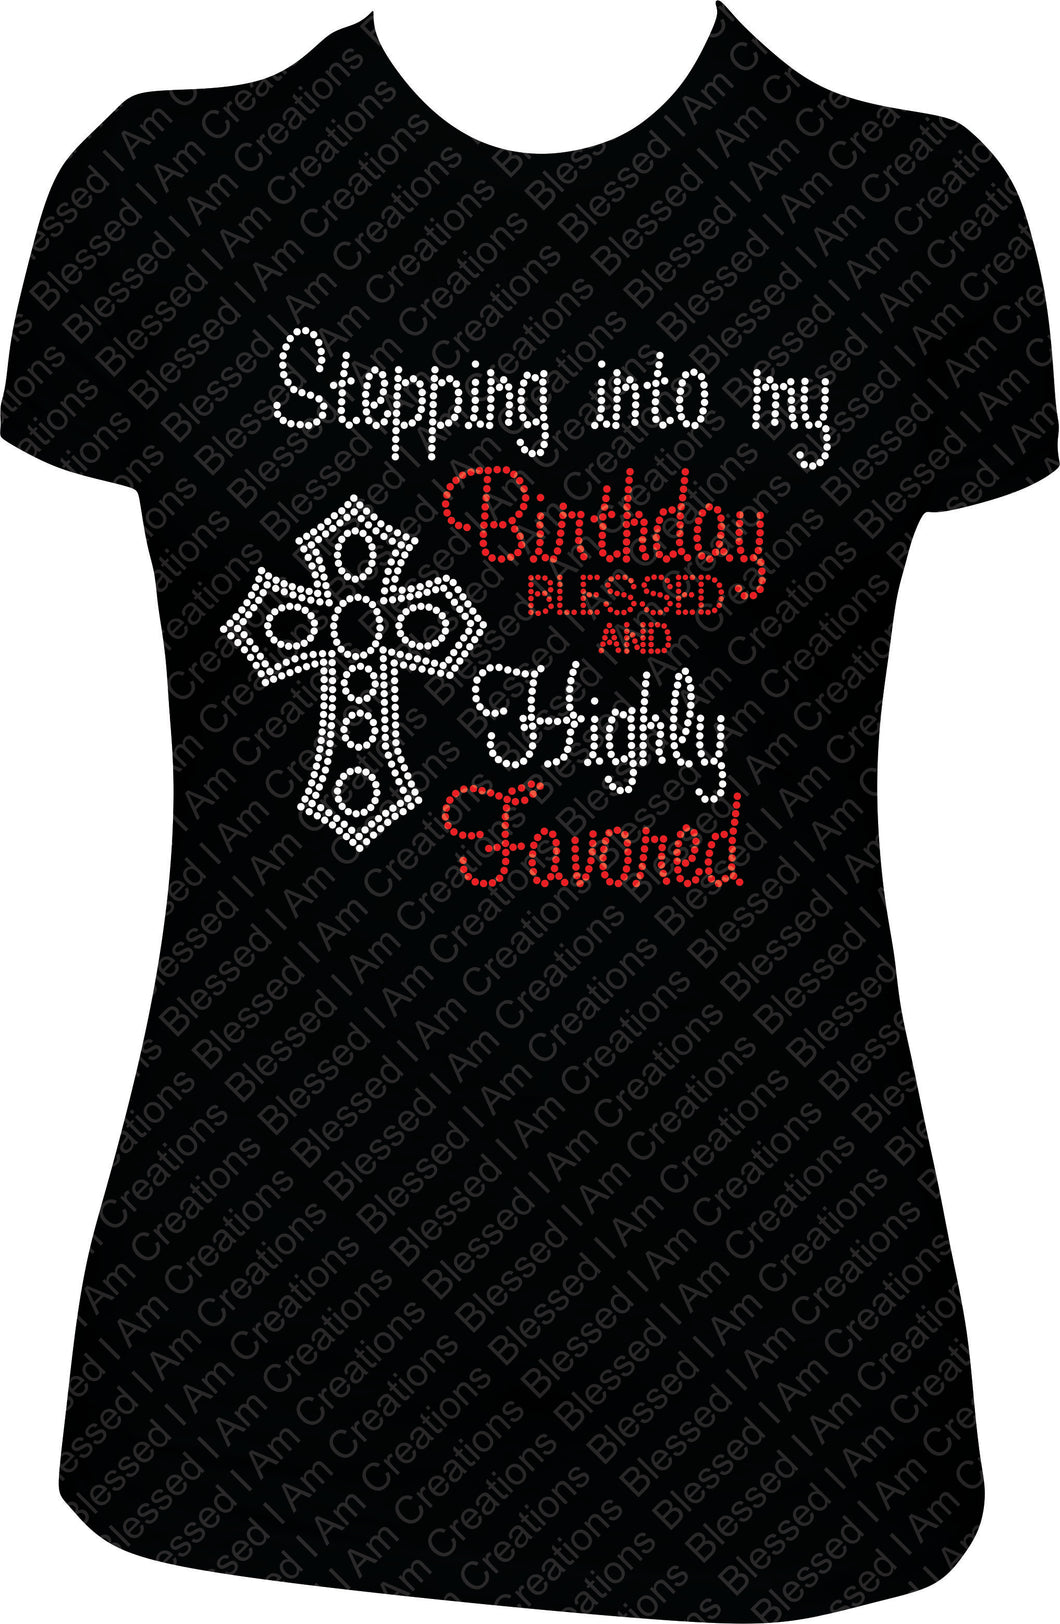 Stepping into my Birthday Blessed and Highly Favored Cross Rhinestone Birthday Shirt